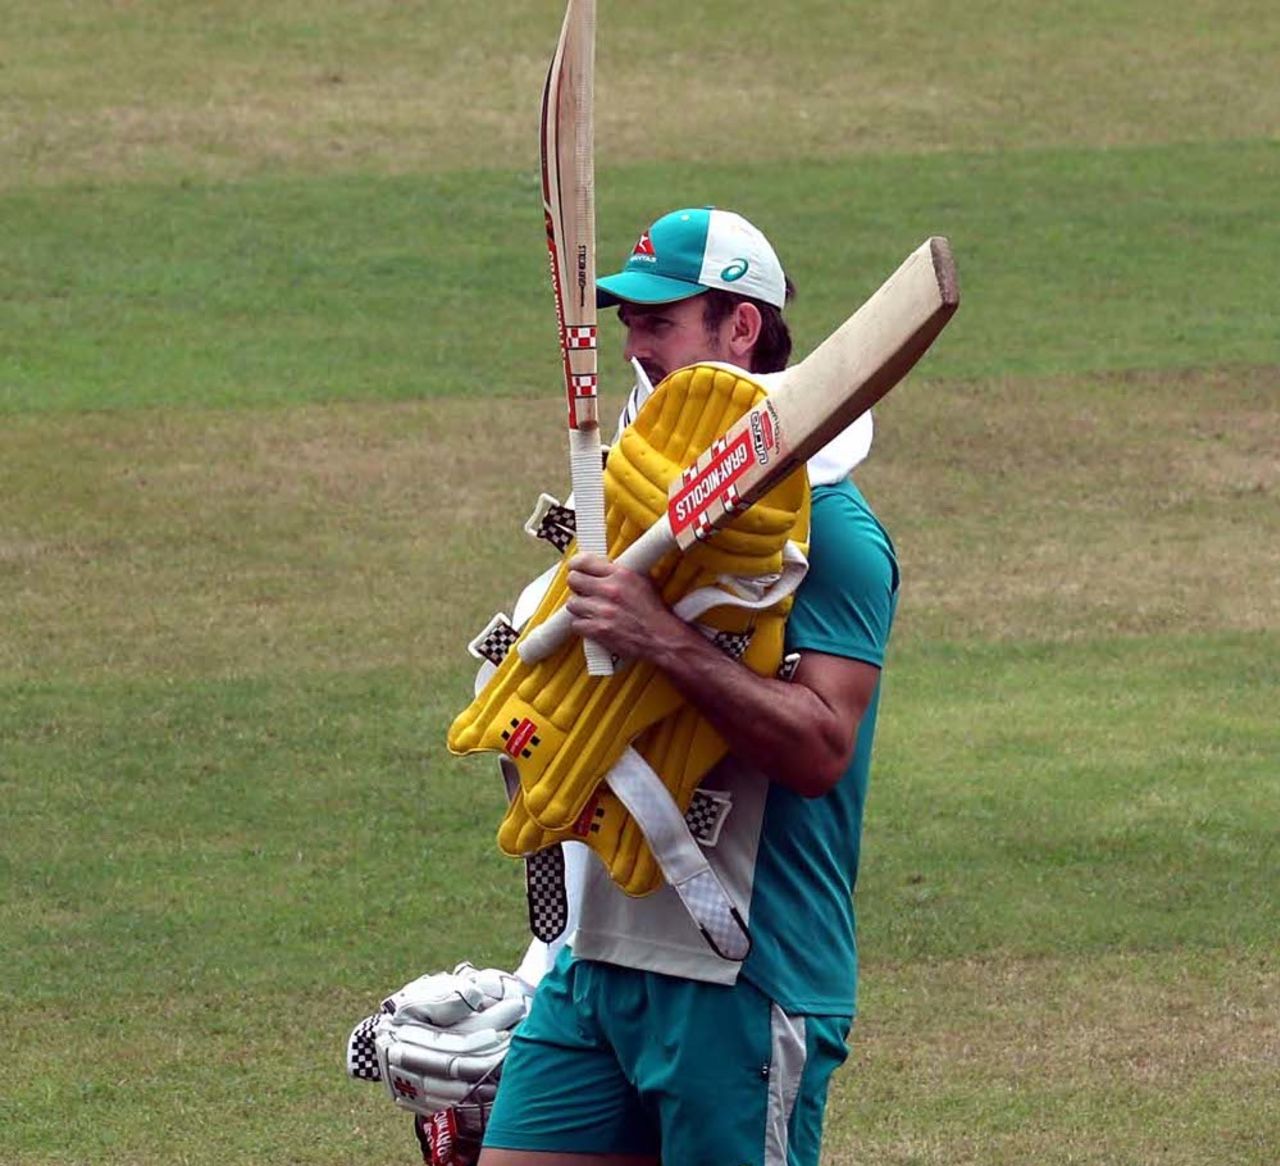 Mitchell Marsh walks out for a hit in the nets, Dhaka, August 2, 2021